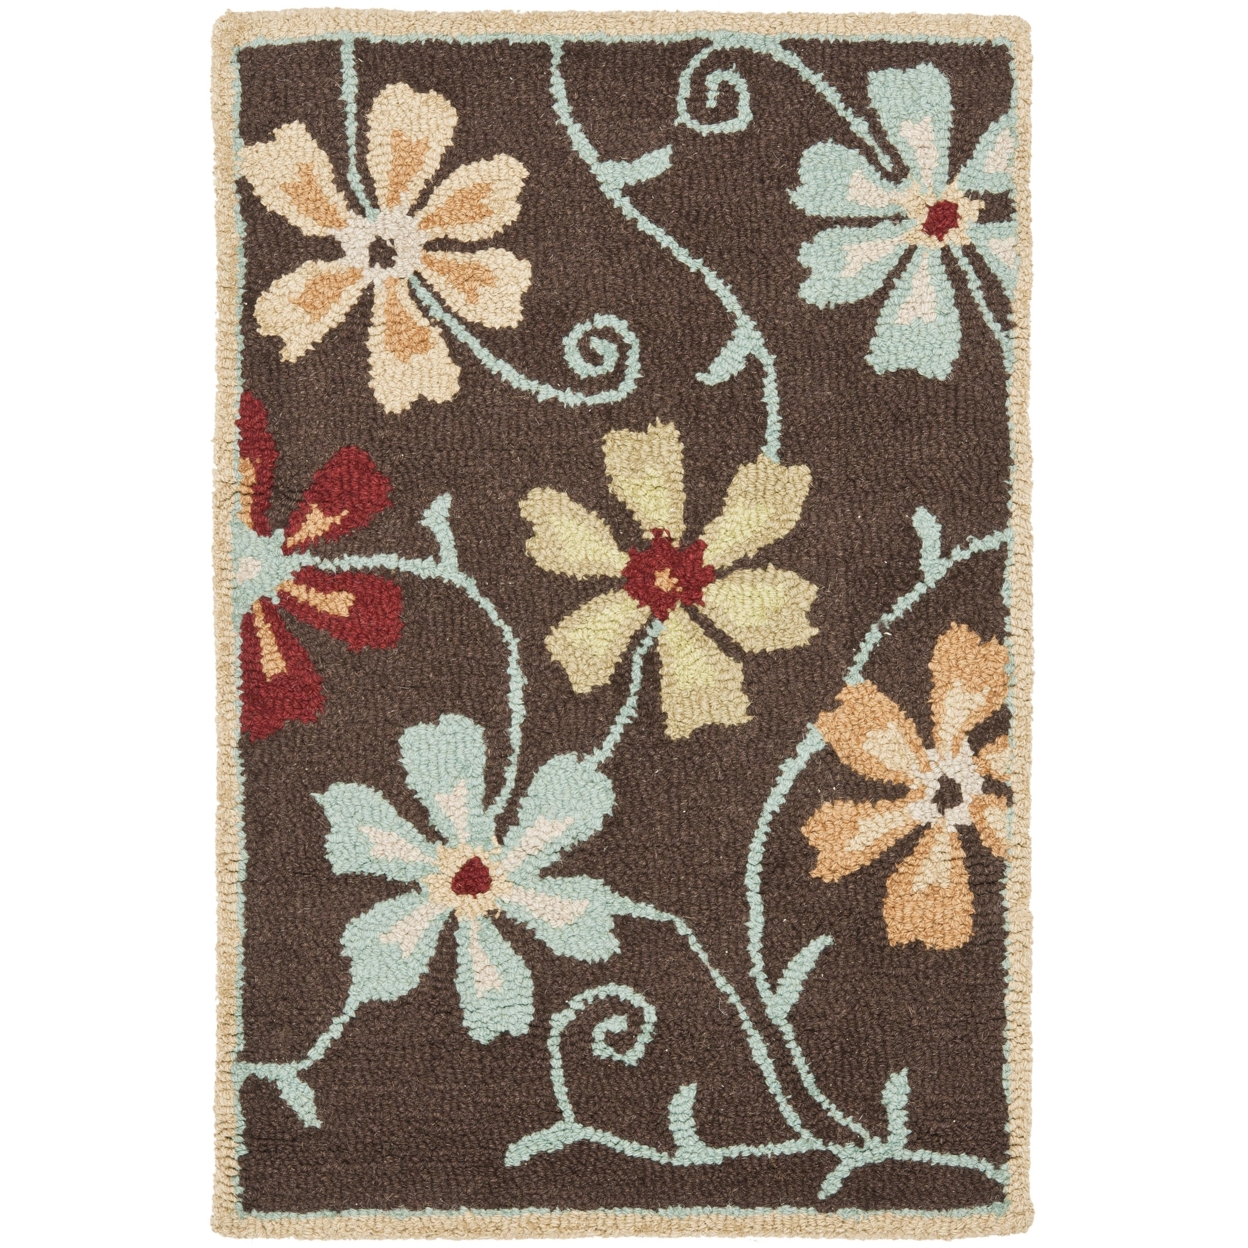 SAFAVIEH Blossom BLM784A Hand-hooked Brown / Multi Rug - 2' 3 X 8'